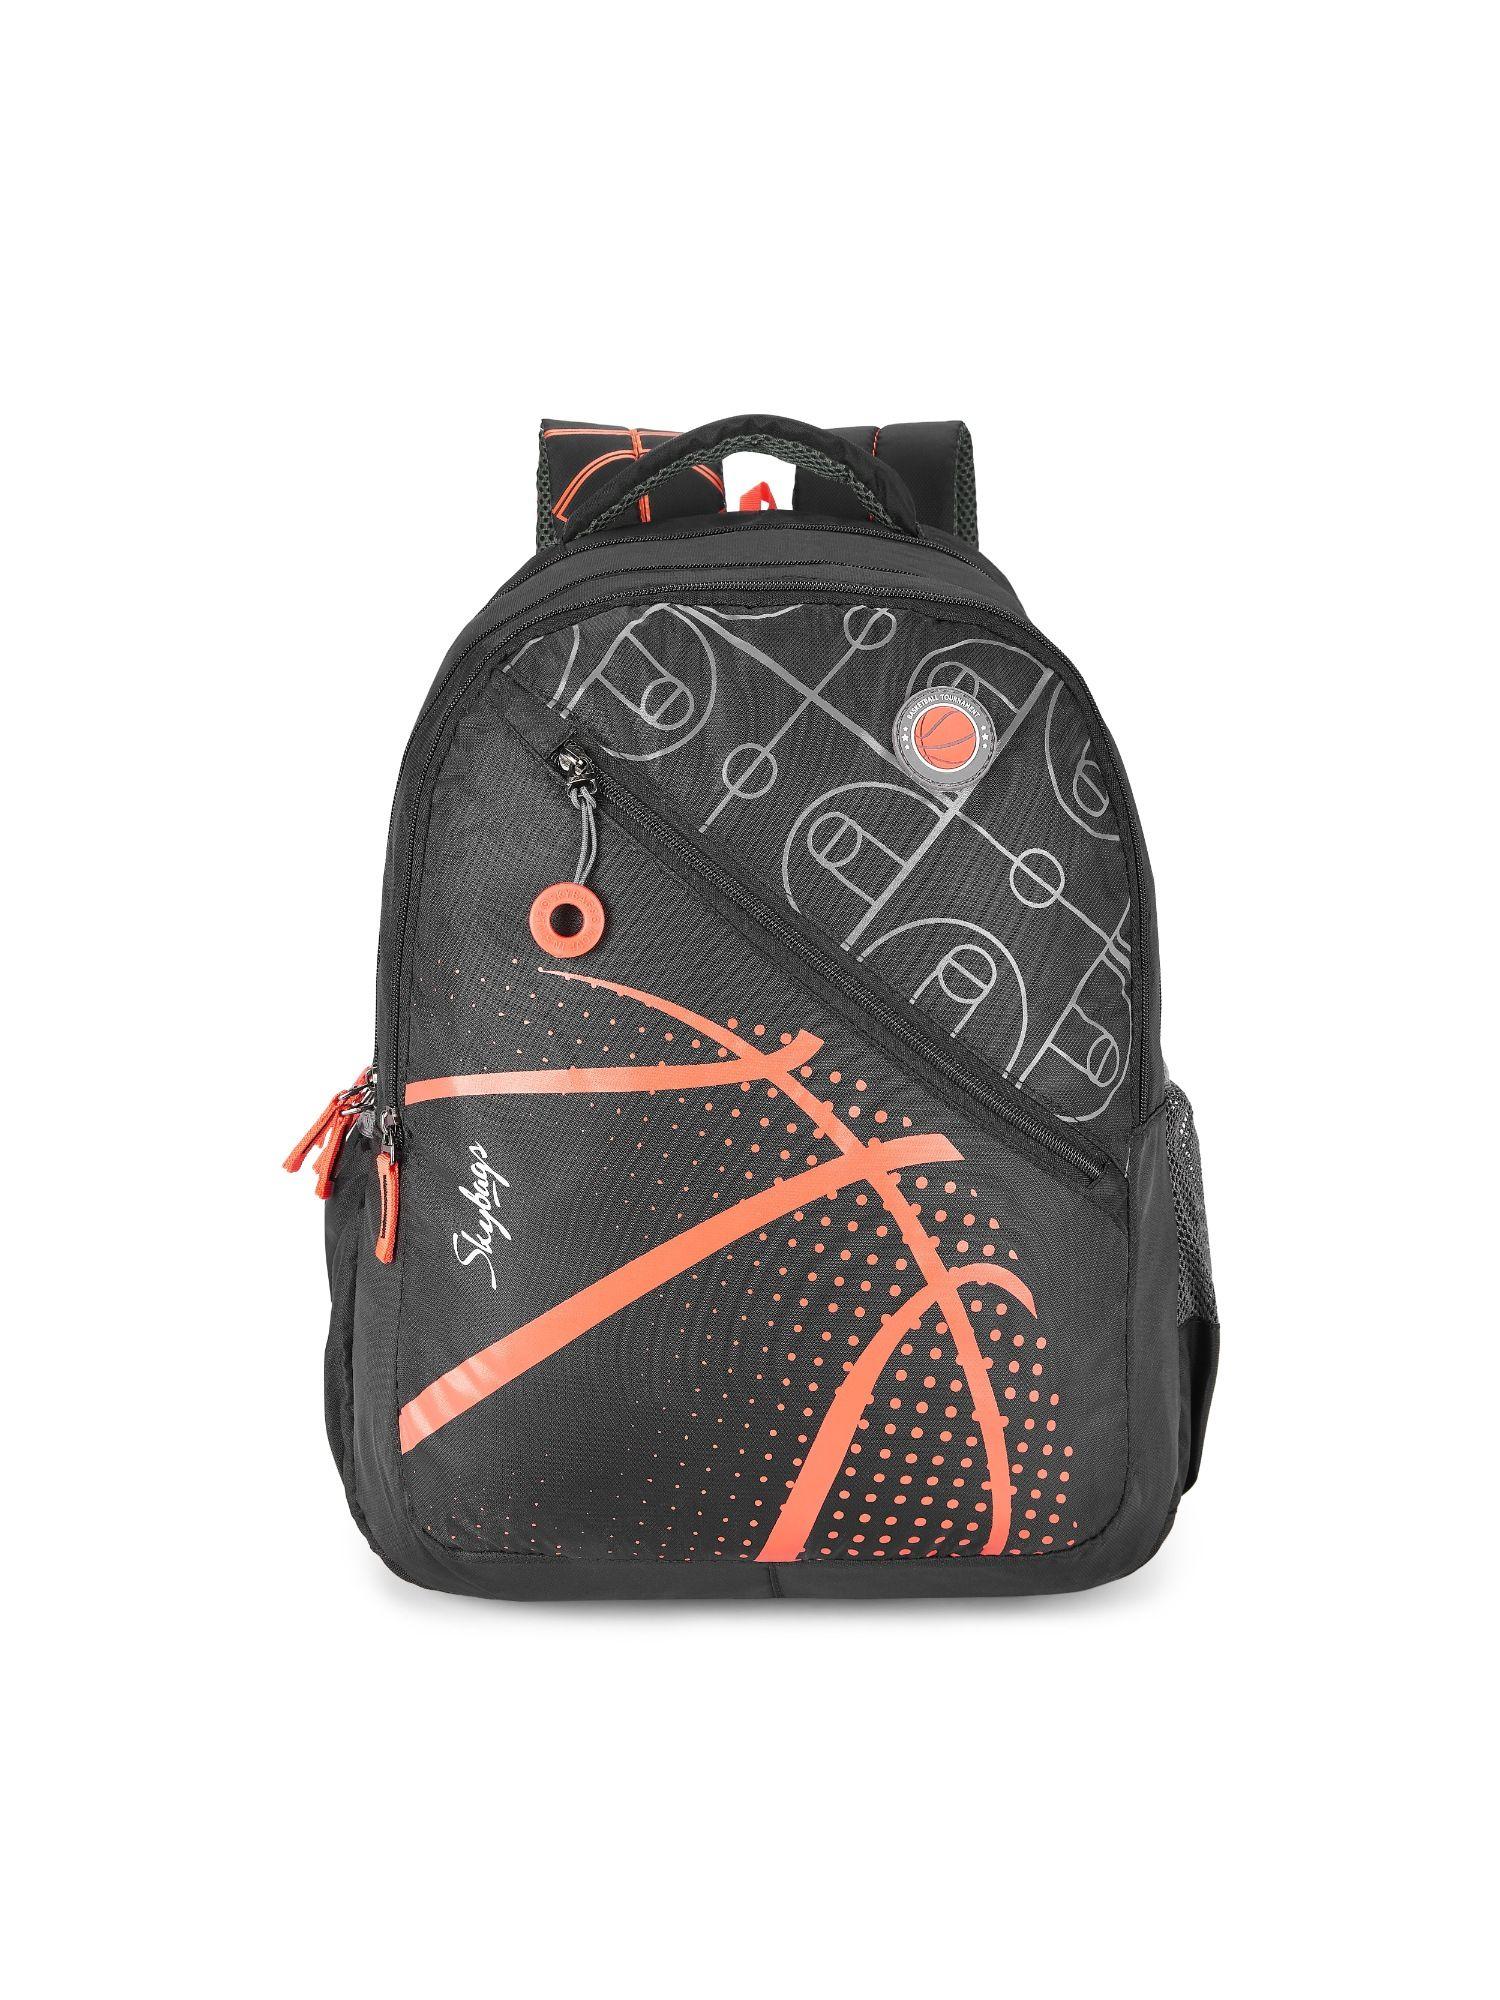 new neon 18 school bag - h black (7 years and above)